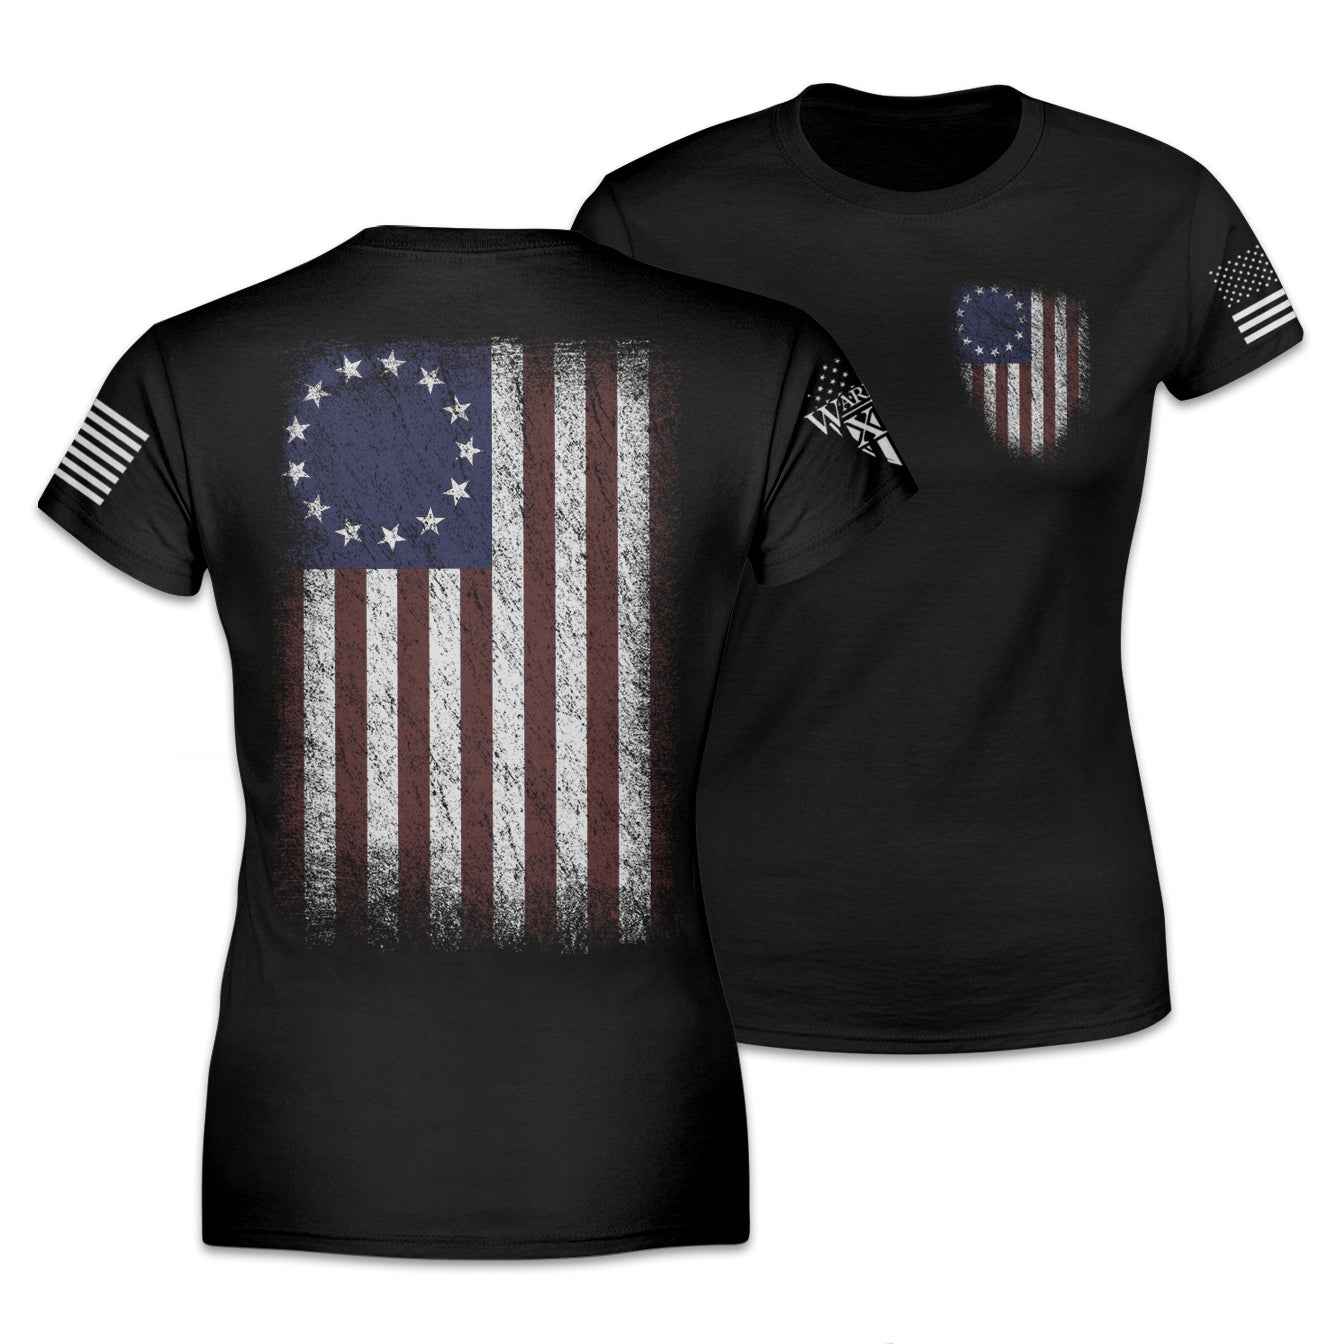 Front and back women's shirt with the Betsy Ross flag.